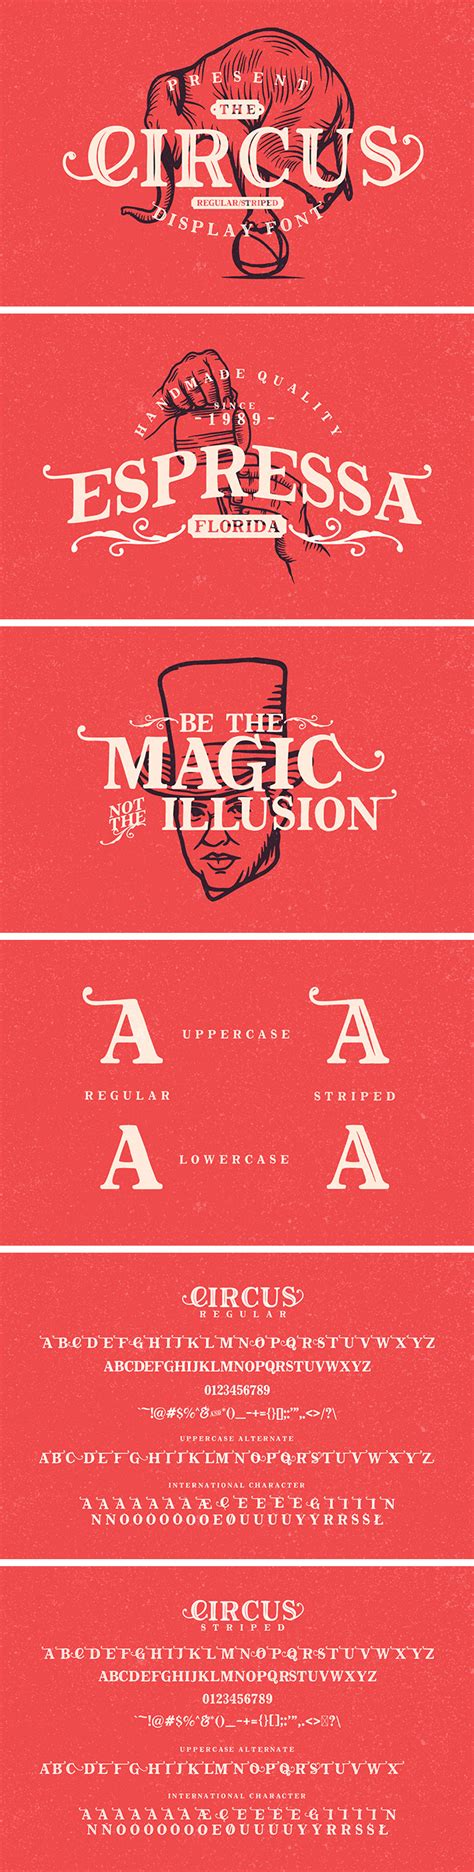 The Circus Display Font Best Free Fonts Display Fonts Circus Design